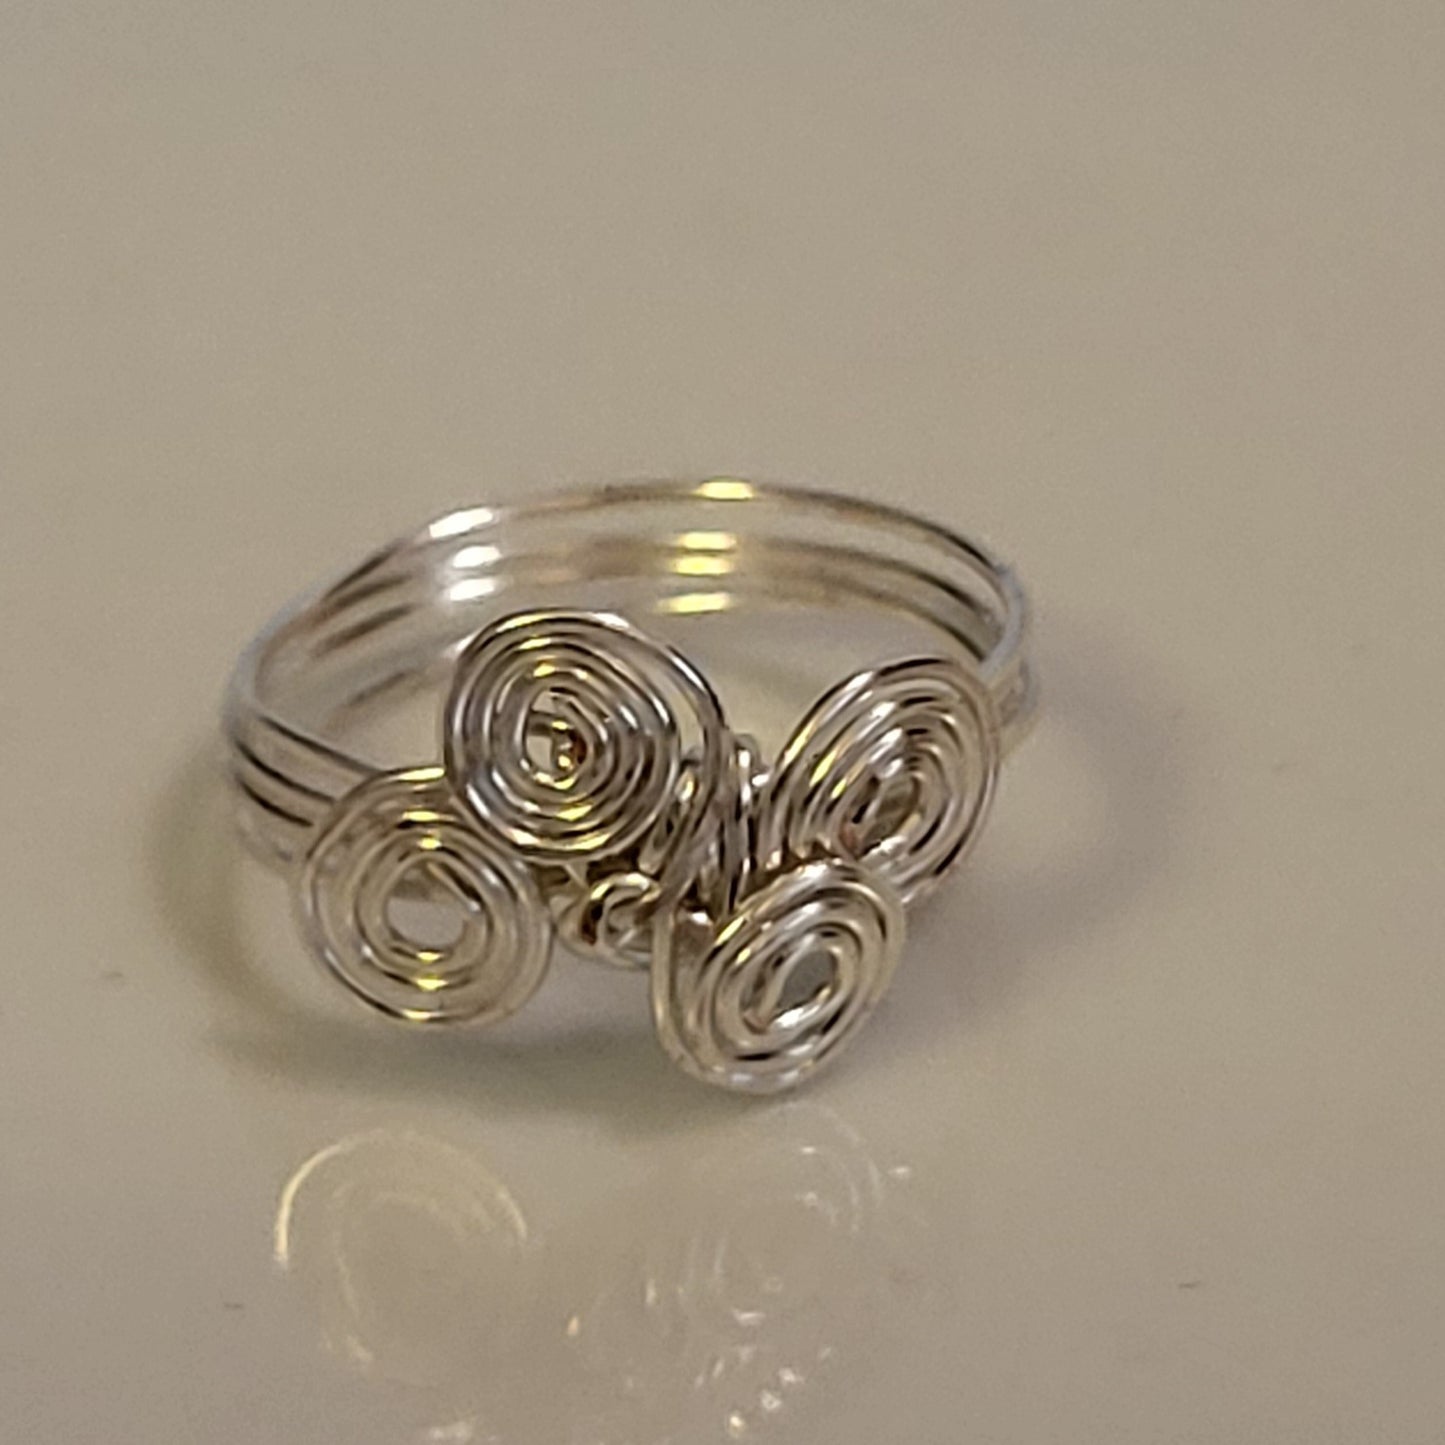 Scroll Ring size 7